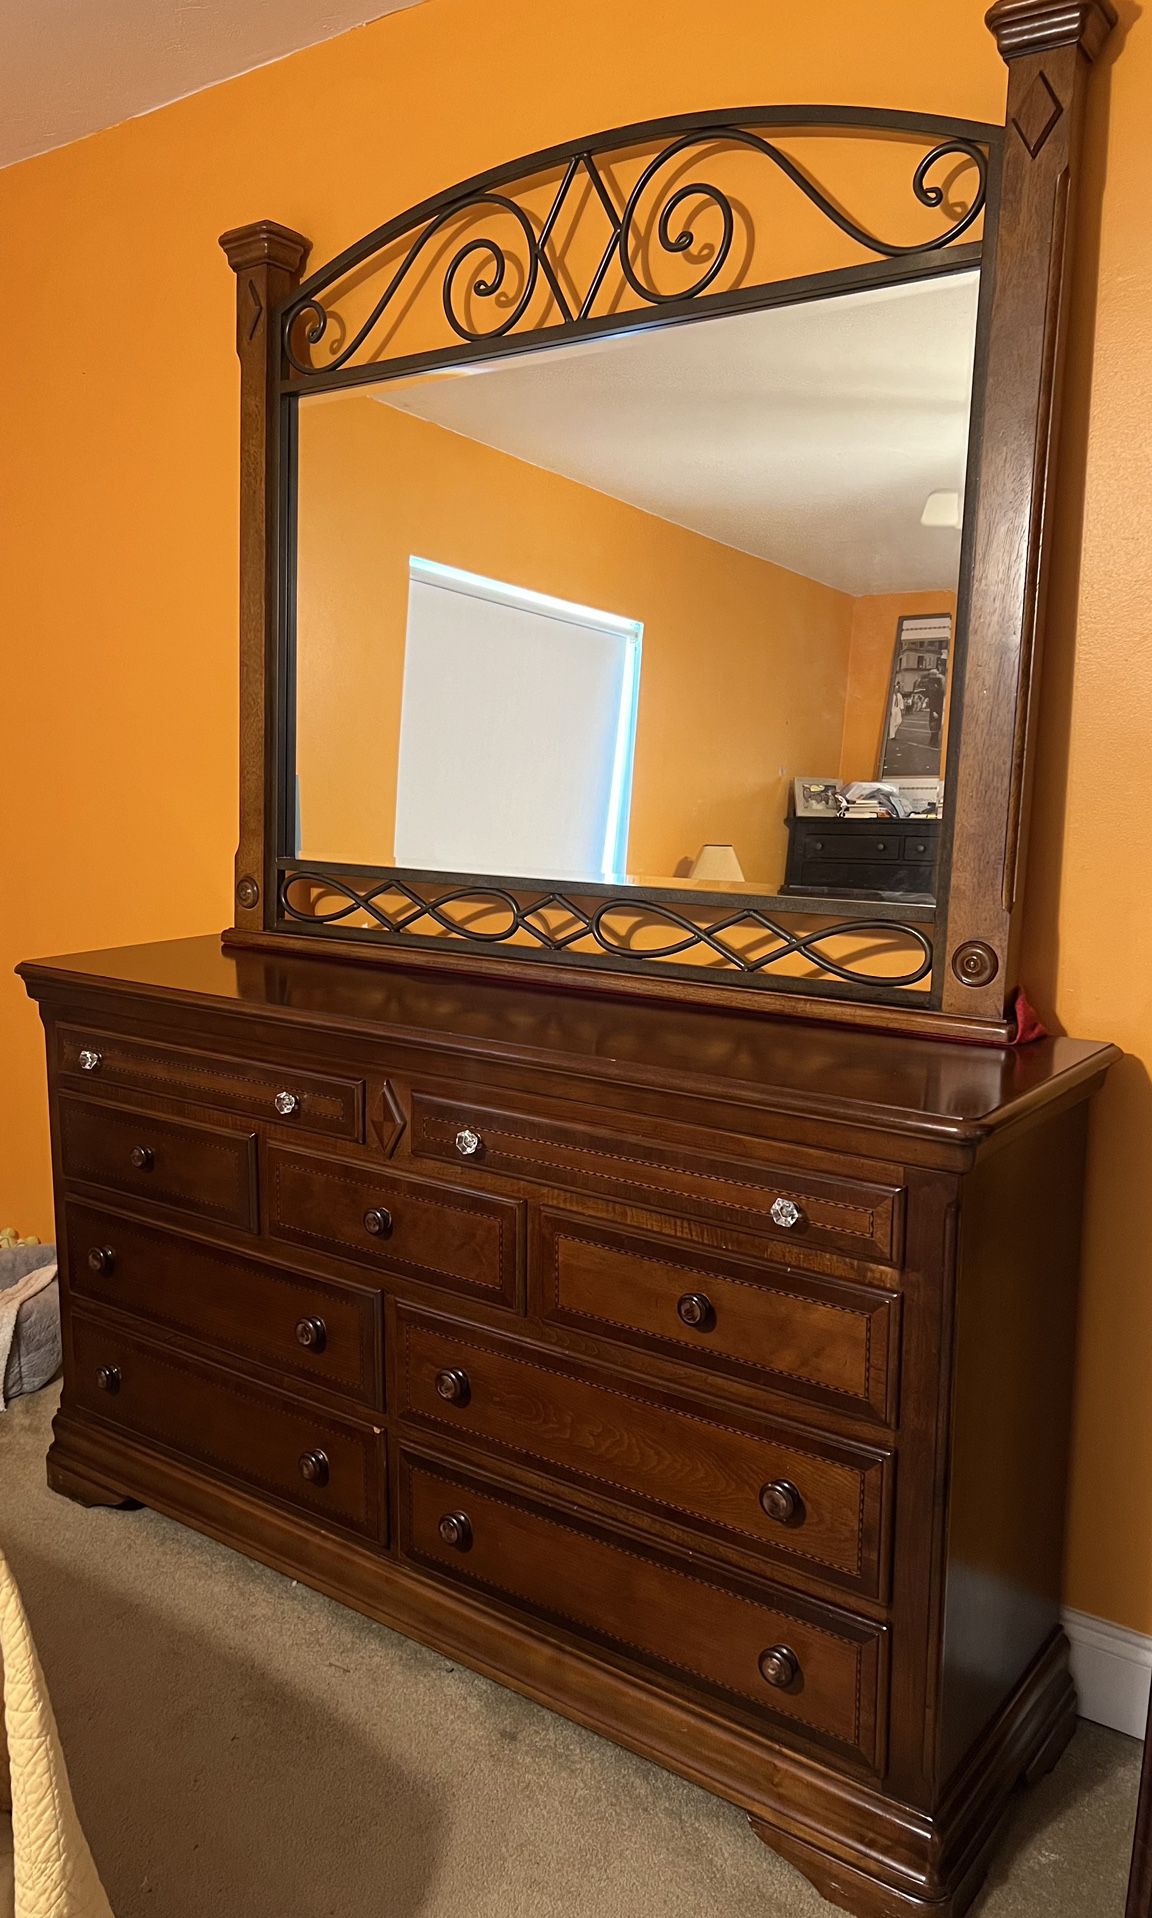 Queen Bedroom Set Bed Frame Armoire And Dresser W Mirror Solid  Make Reasonable Offers Pls It’s Was Over $4k